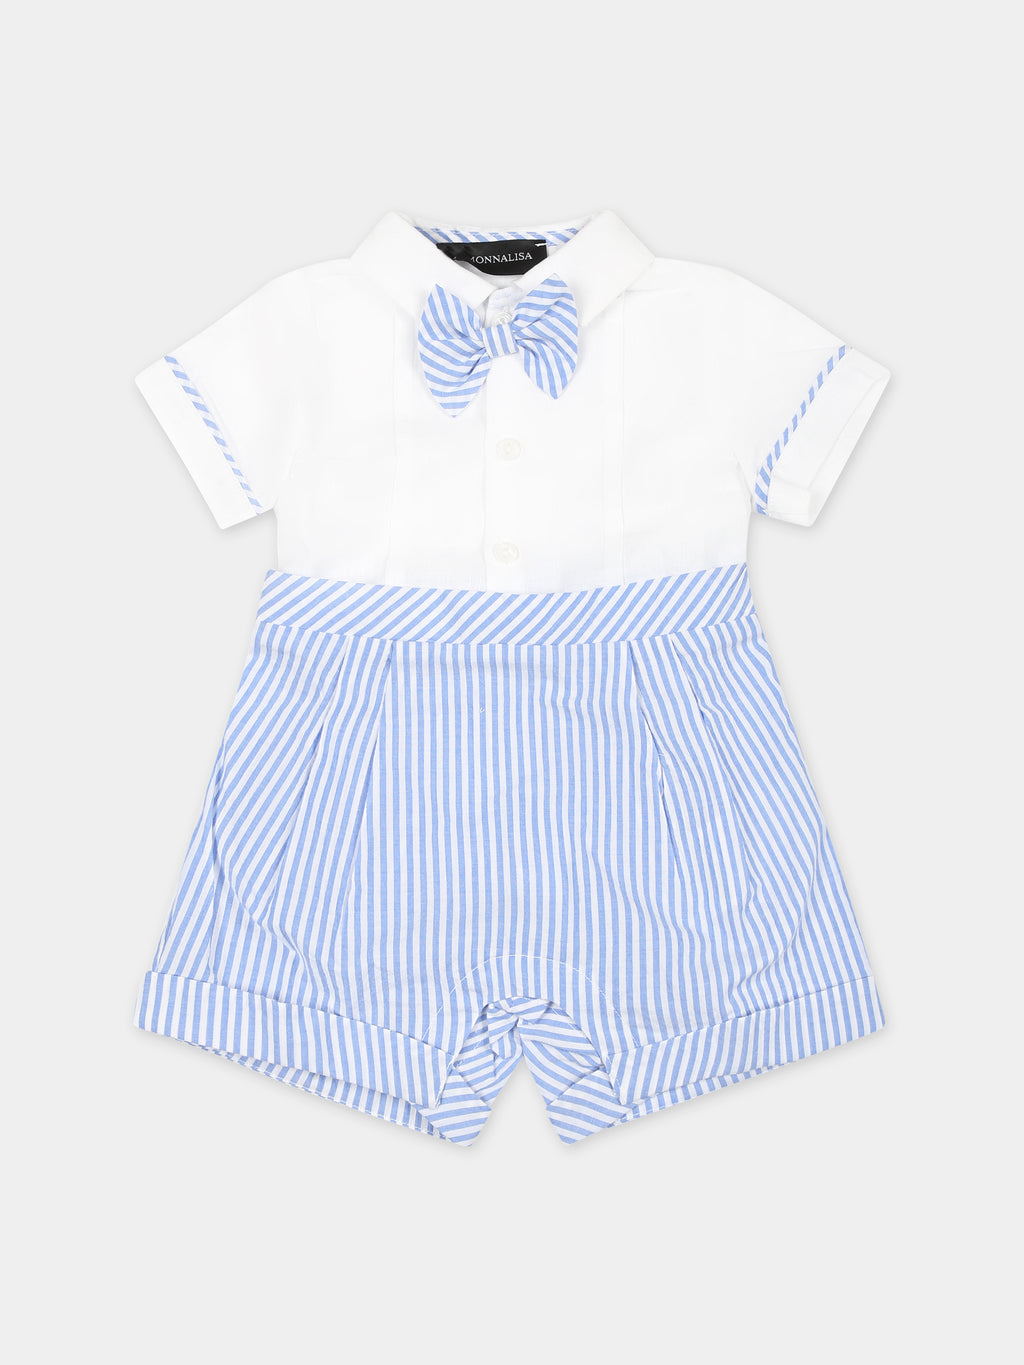 Light blue romper for baby boy with bow tie